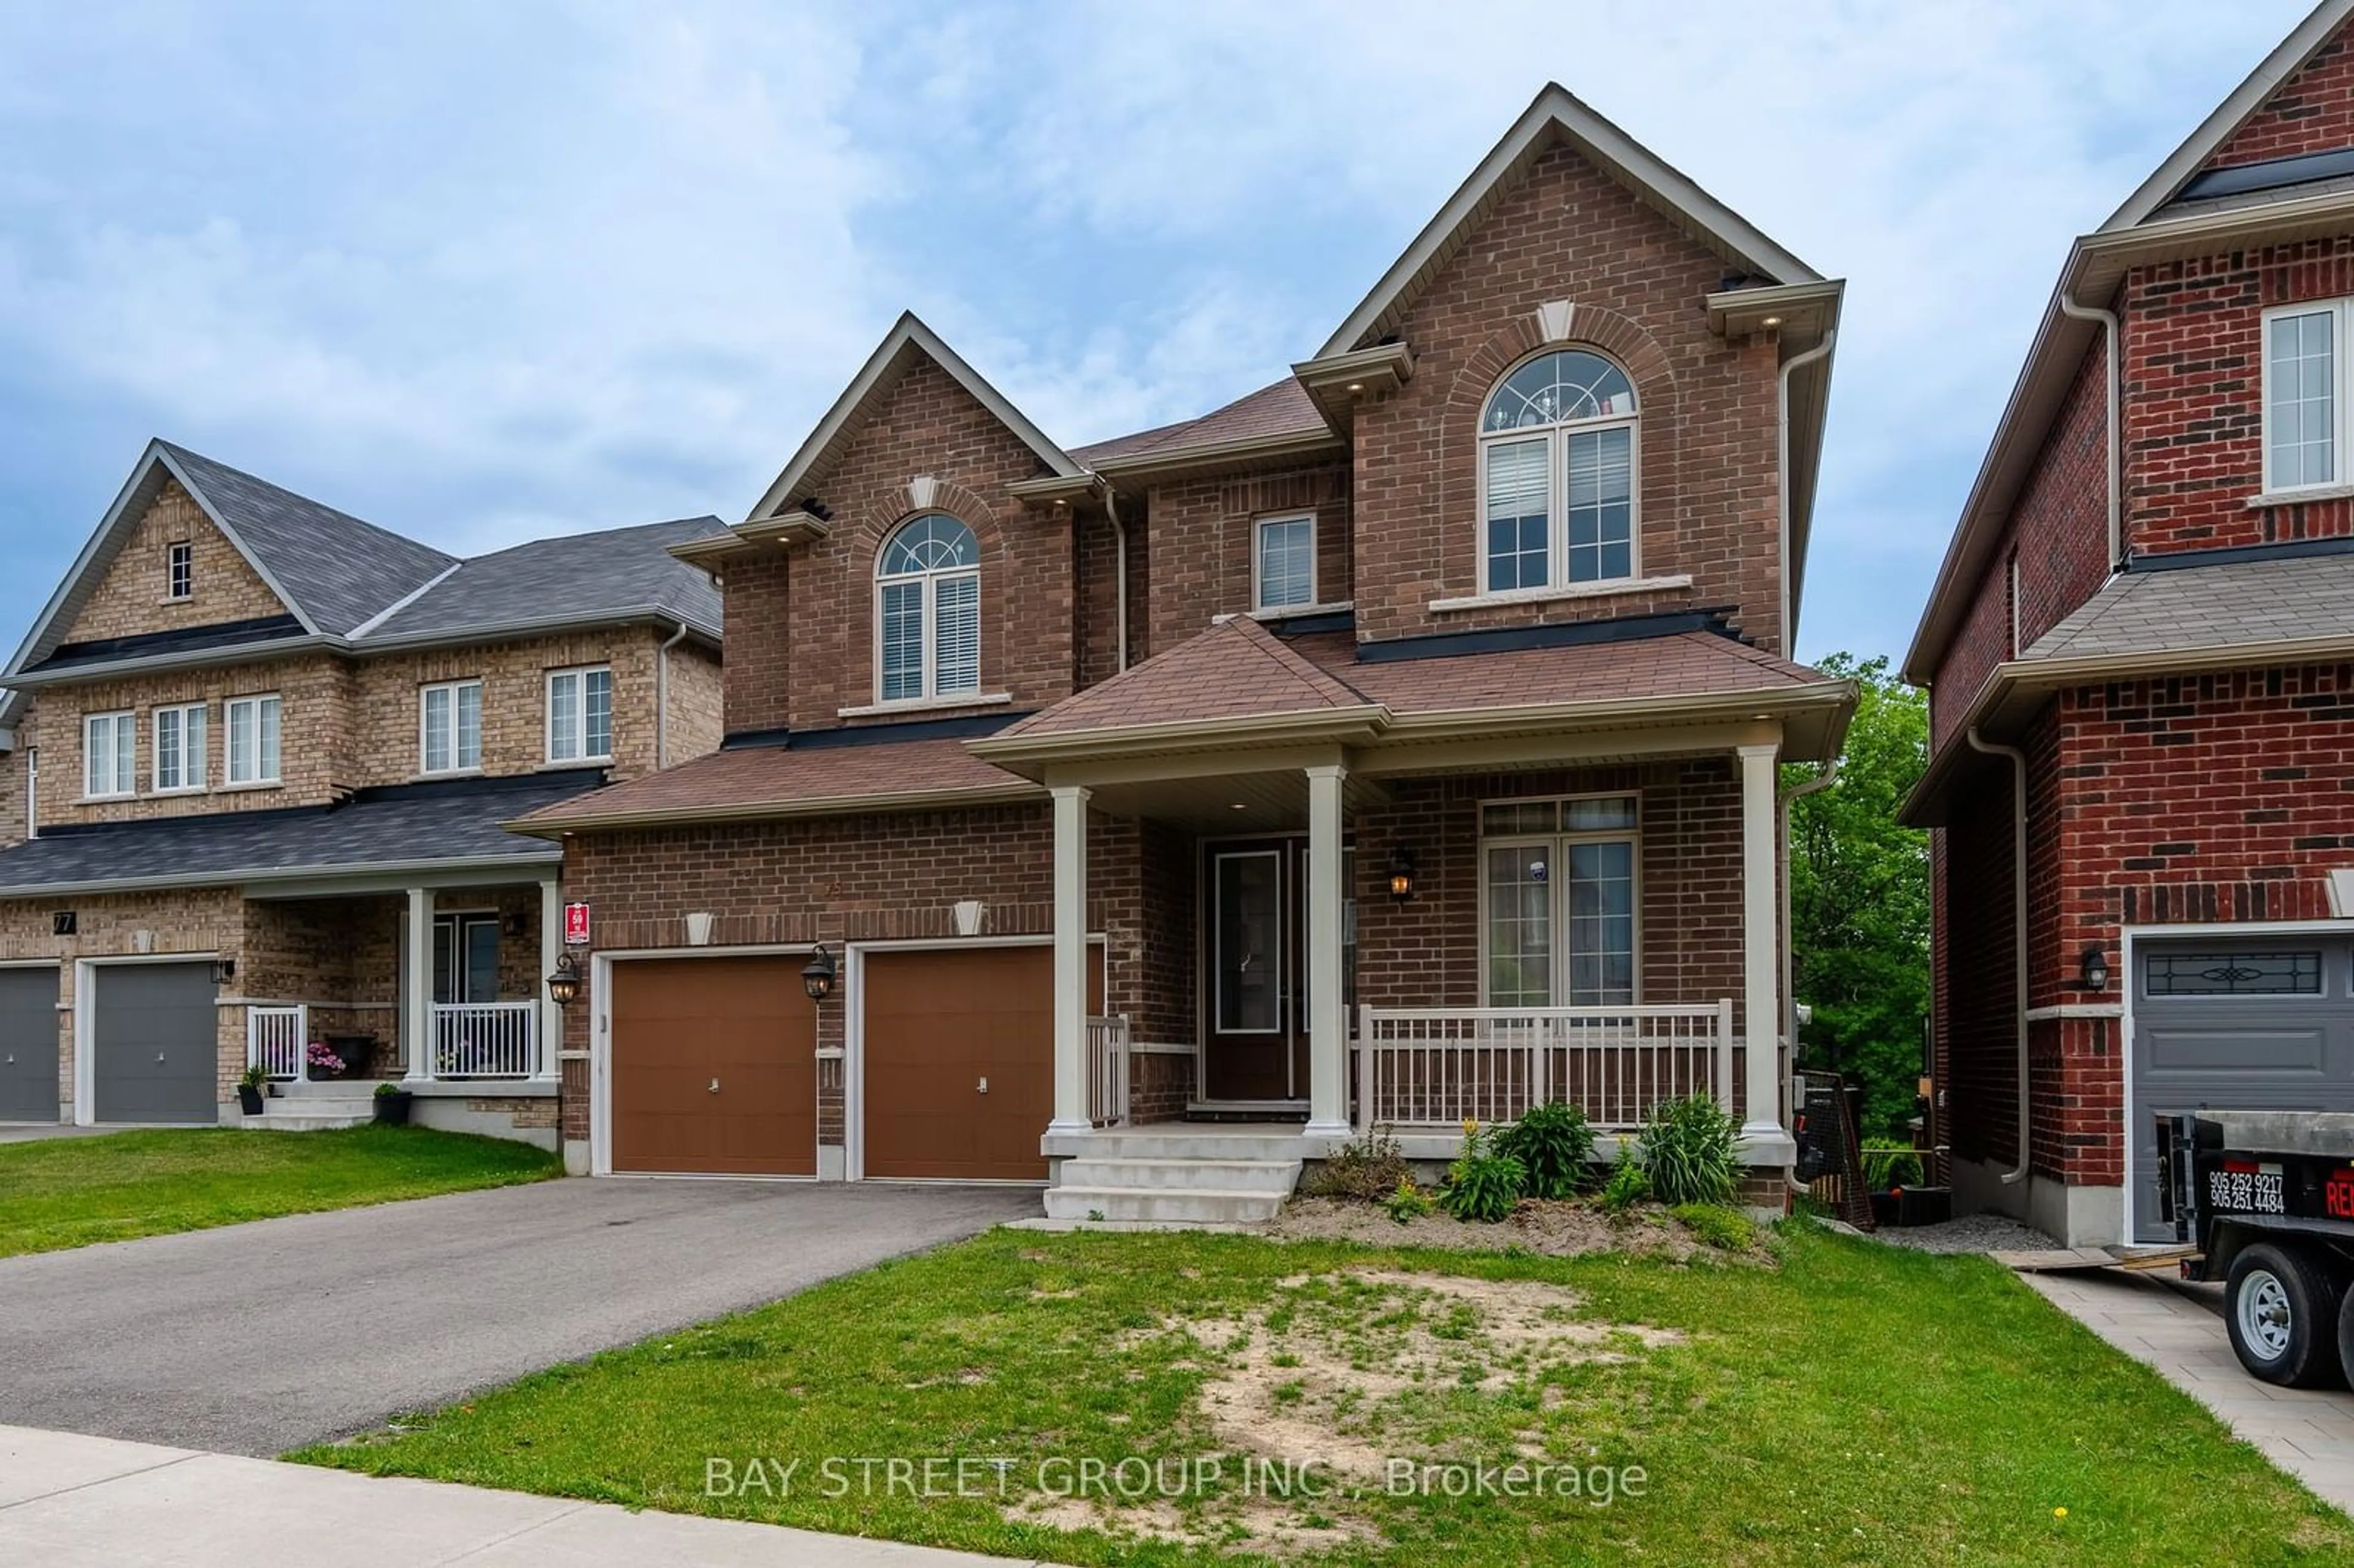 Home with brick exterior material for 75 Muirfield Dr, Barrie Ontario L4N 5S4